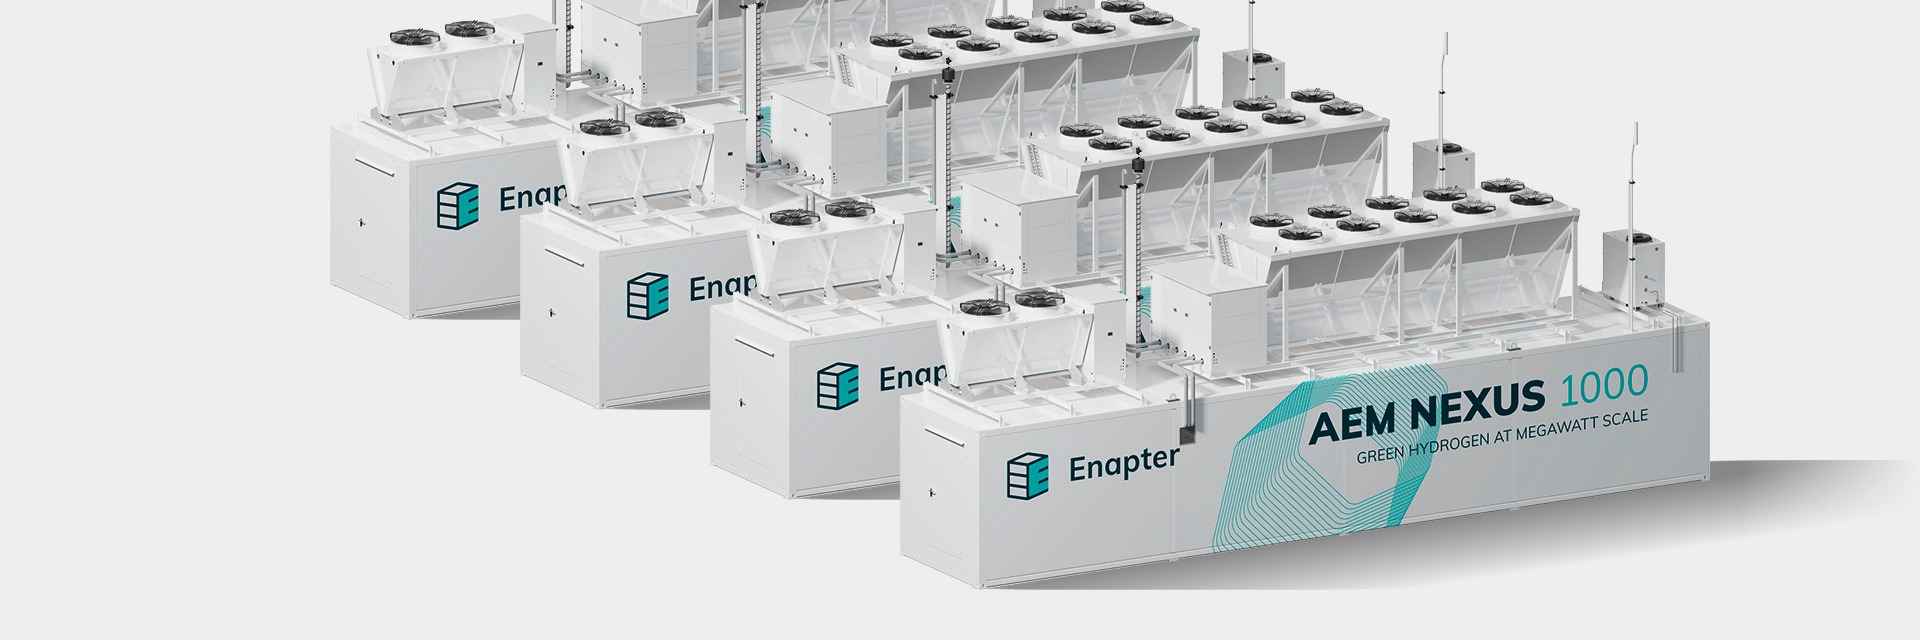 Enapter AG (ISIN: DE000A255G02) has announced receiving significant orders for its AEM Nexus 1000 electrolyser, marking a stride in green hydrogen production. This electrolyser, known for its multicore technology, is designed for efficient green hydrogen production on an industrial scale without relying on the rare and expensive metal iridium. This feature allows clients to confidently plan their expansion without future resource constraints. CFFT SpA, a logistics company operating a harbor near Rome, has placed an order for three 1 MW AEM Nexus multicore-class units. These electrolysers will power a hydrogen refueling system with renewable energy, marking Enapter's largest single European order to date. Additionally, F.i.l.m.s SpA, a metalworking firm specializing in hard metal parts, has ordered a 1 MW AEM Nexus 1000 electrolyser to produce green hydrogen on-site, aiding in the transition away from conventional hydrogen and natural gas towards sustainable alternatives. Valued in the upper seven-figure euro range, these Italian contracts underscore Enapter's strength in the market, highlighting a growing trend towards sustainable energy production. CEO Jürgen Laakmann expressed that these successes in Italy reflect Enapter’s capability to meet the demand for scalable, iridium-free electrolysers, providing crucial support for companies aiming to contribute to the energy transition.